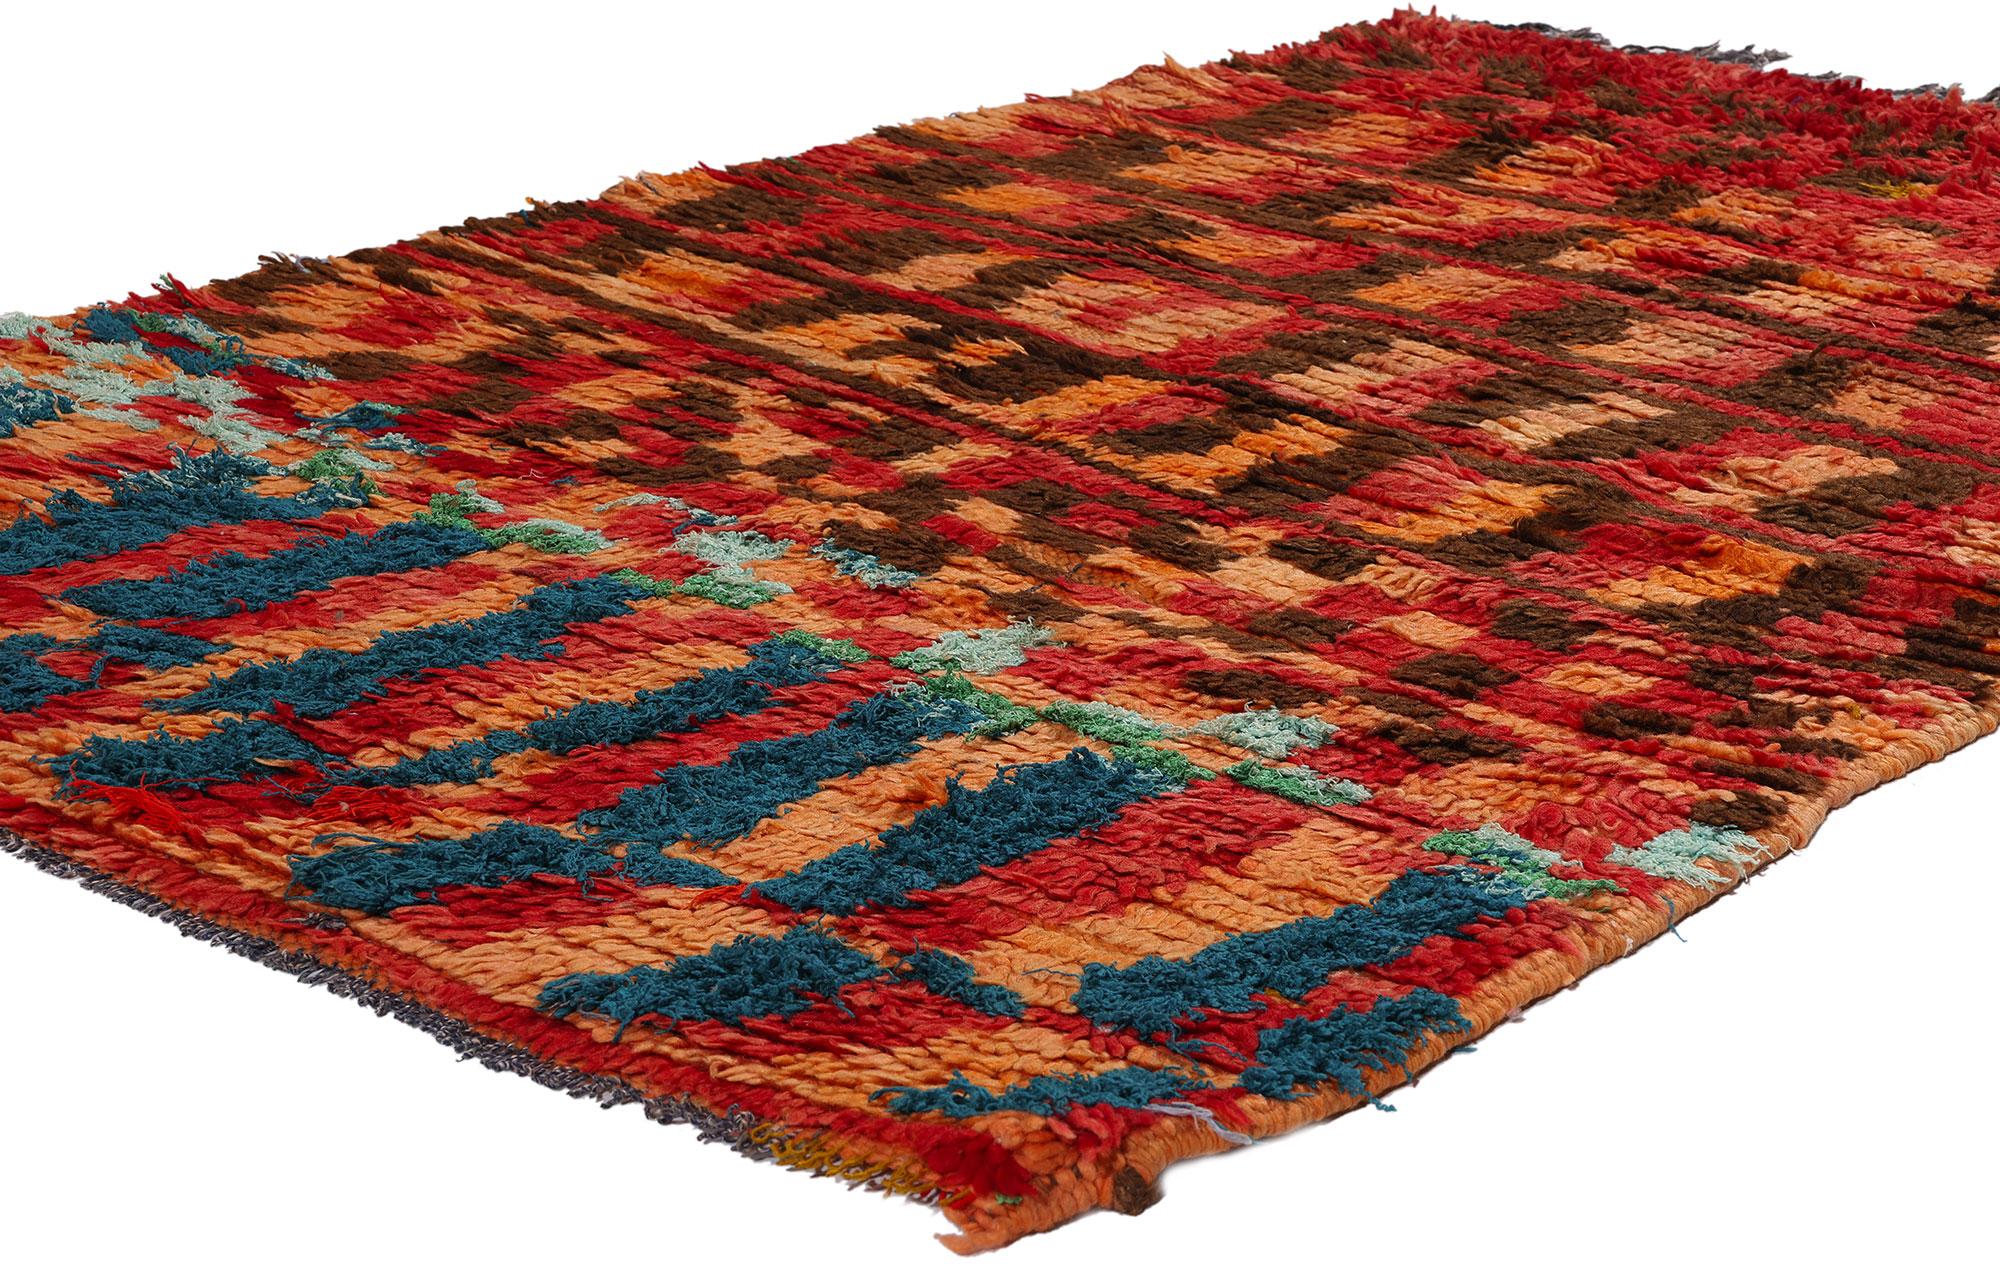 21733 Vintage Red Boujad Moroccan Rug, 03'09 x 04'04. Originating from Morocco's Boujad region, Boujad rugs are far more than simple floor coverings; they are intricate masterpieces of handwoven art that encapsulate the vibrant artistic heritage of